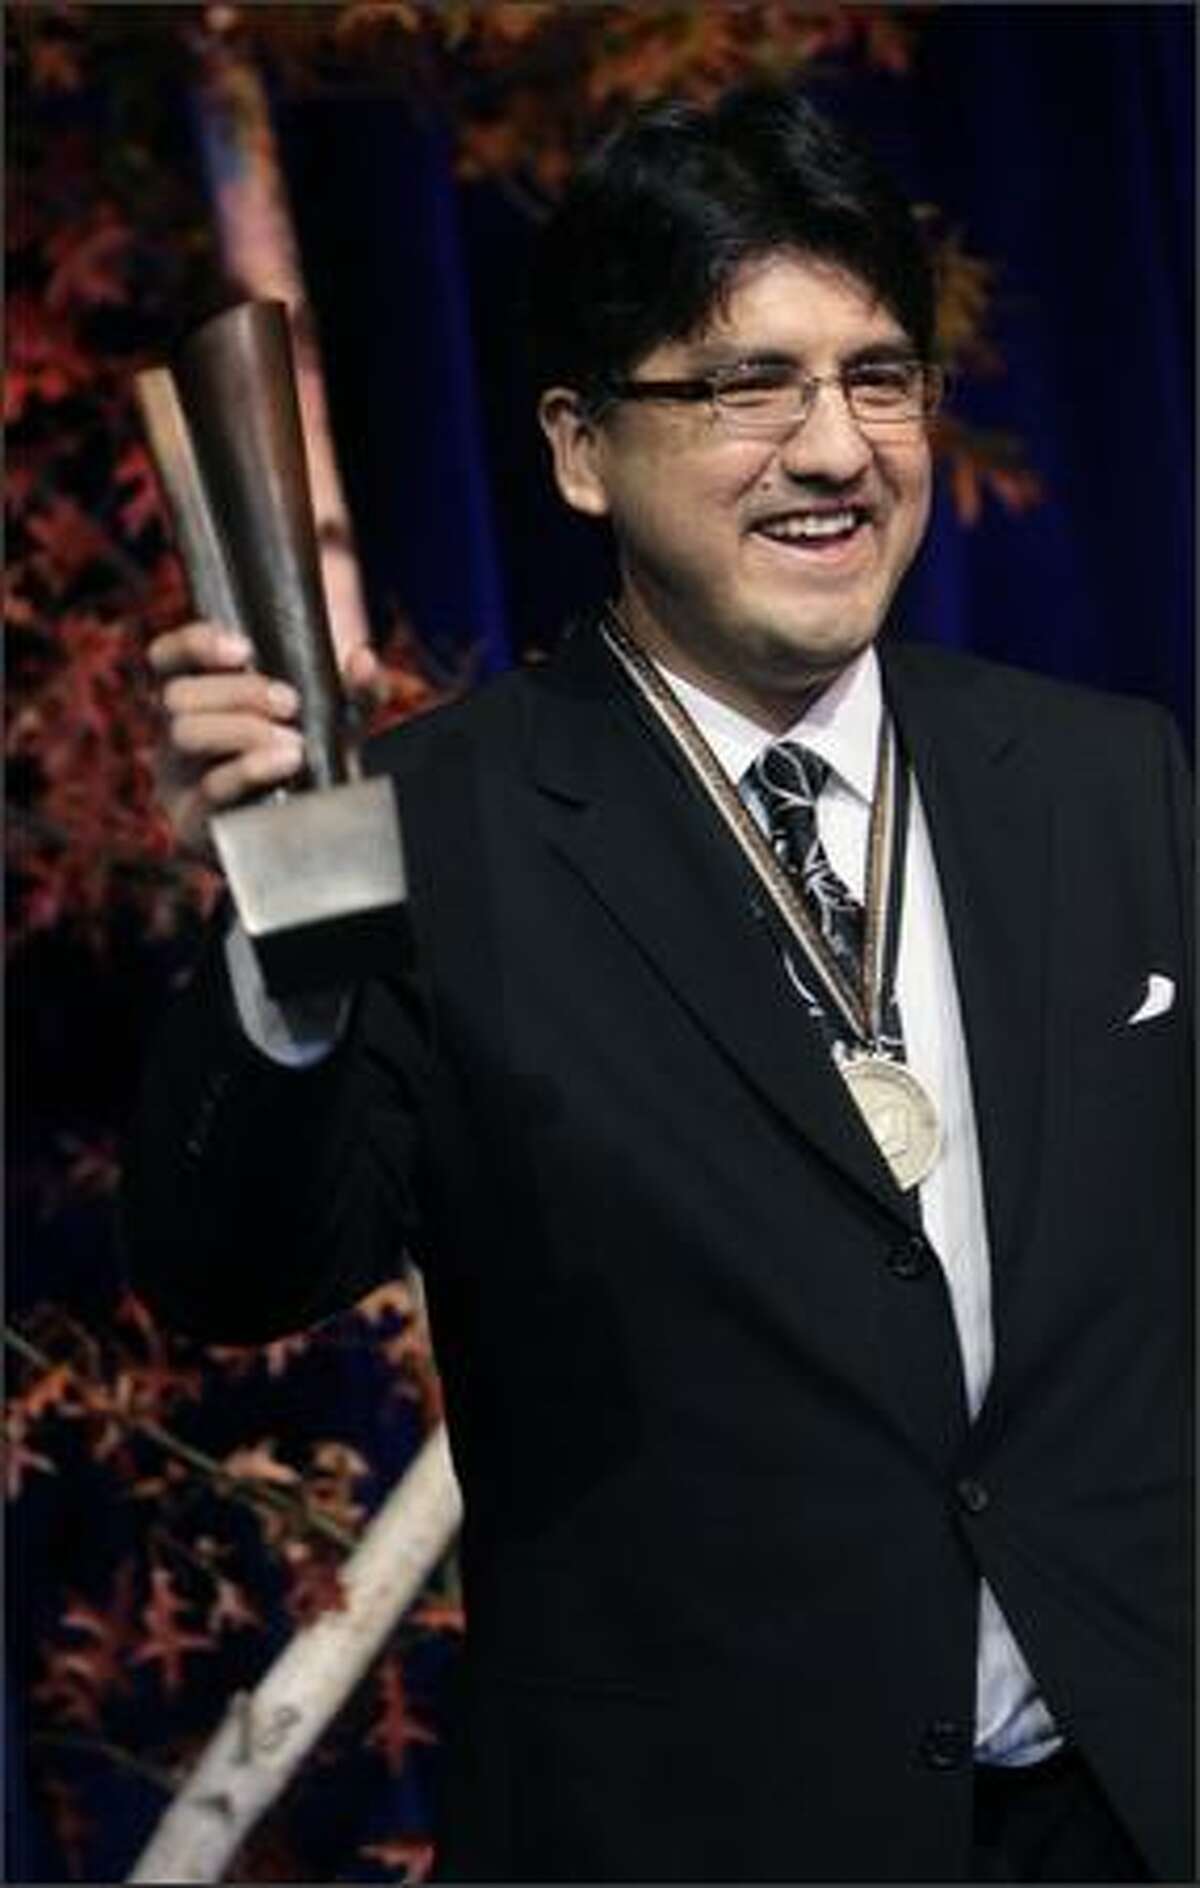 Sherman Alexie accepts the National Book Award for Young People's Literature for his book "The Absolutely True Diary of a Part-Time Indian" at the 58th National Book Awards in New York.